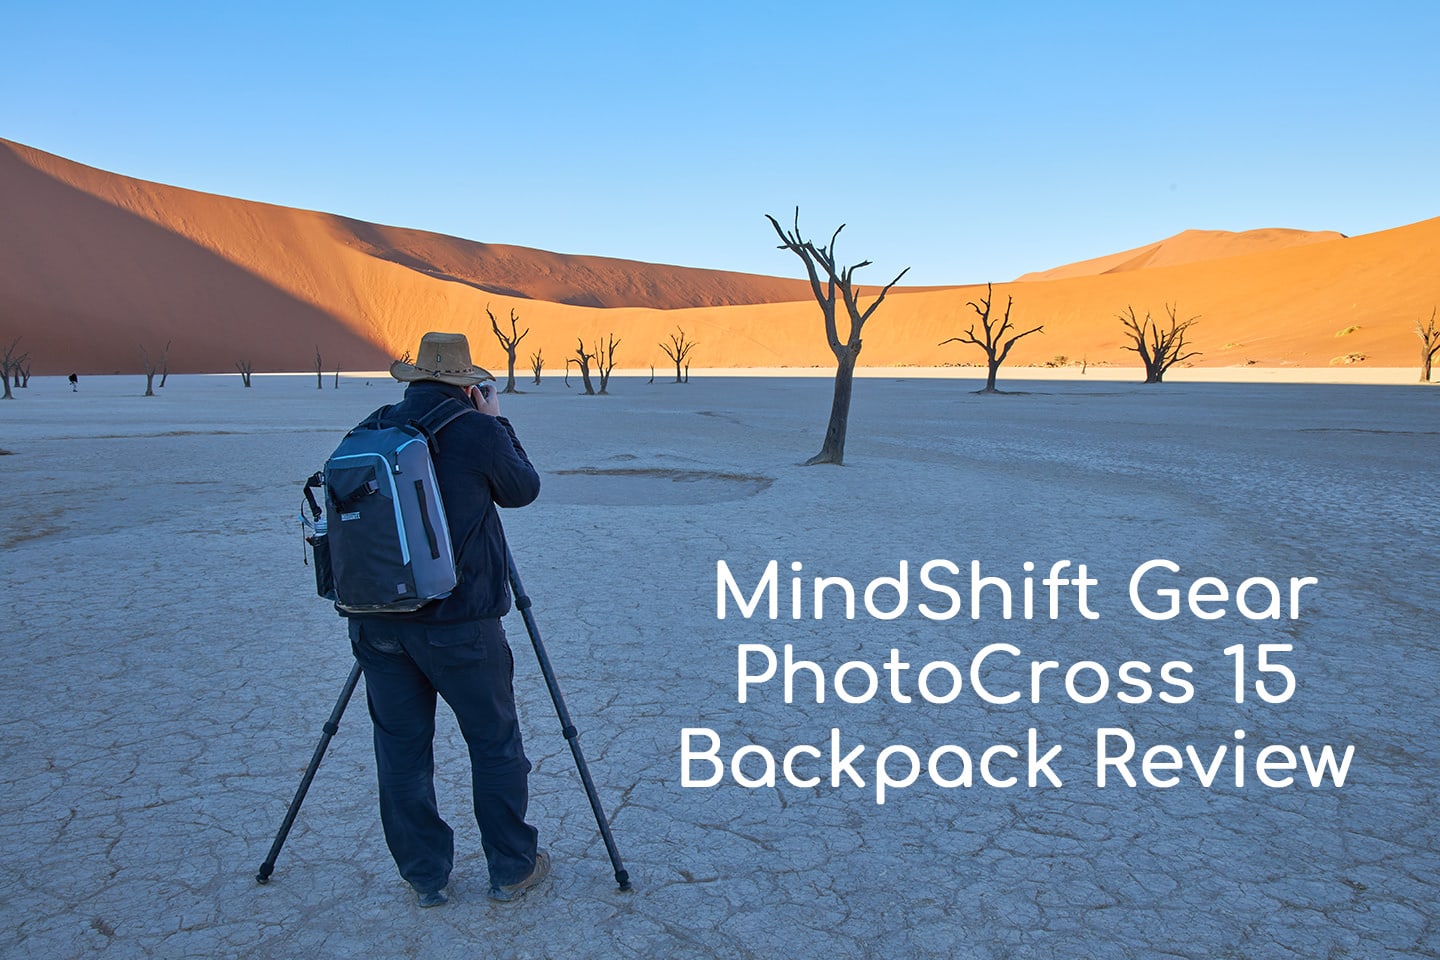 MindShift Gear PhotoCross 15 Backpack Review (Podcast 665)